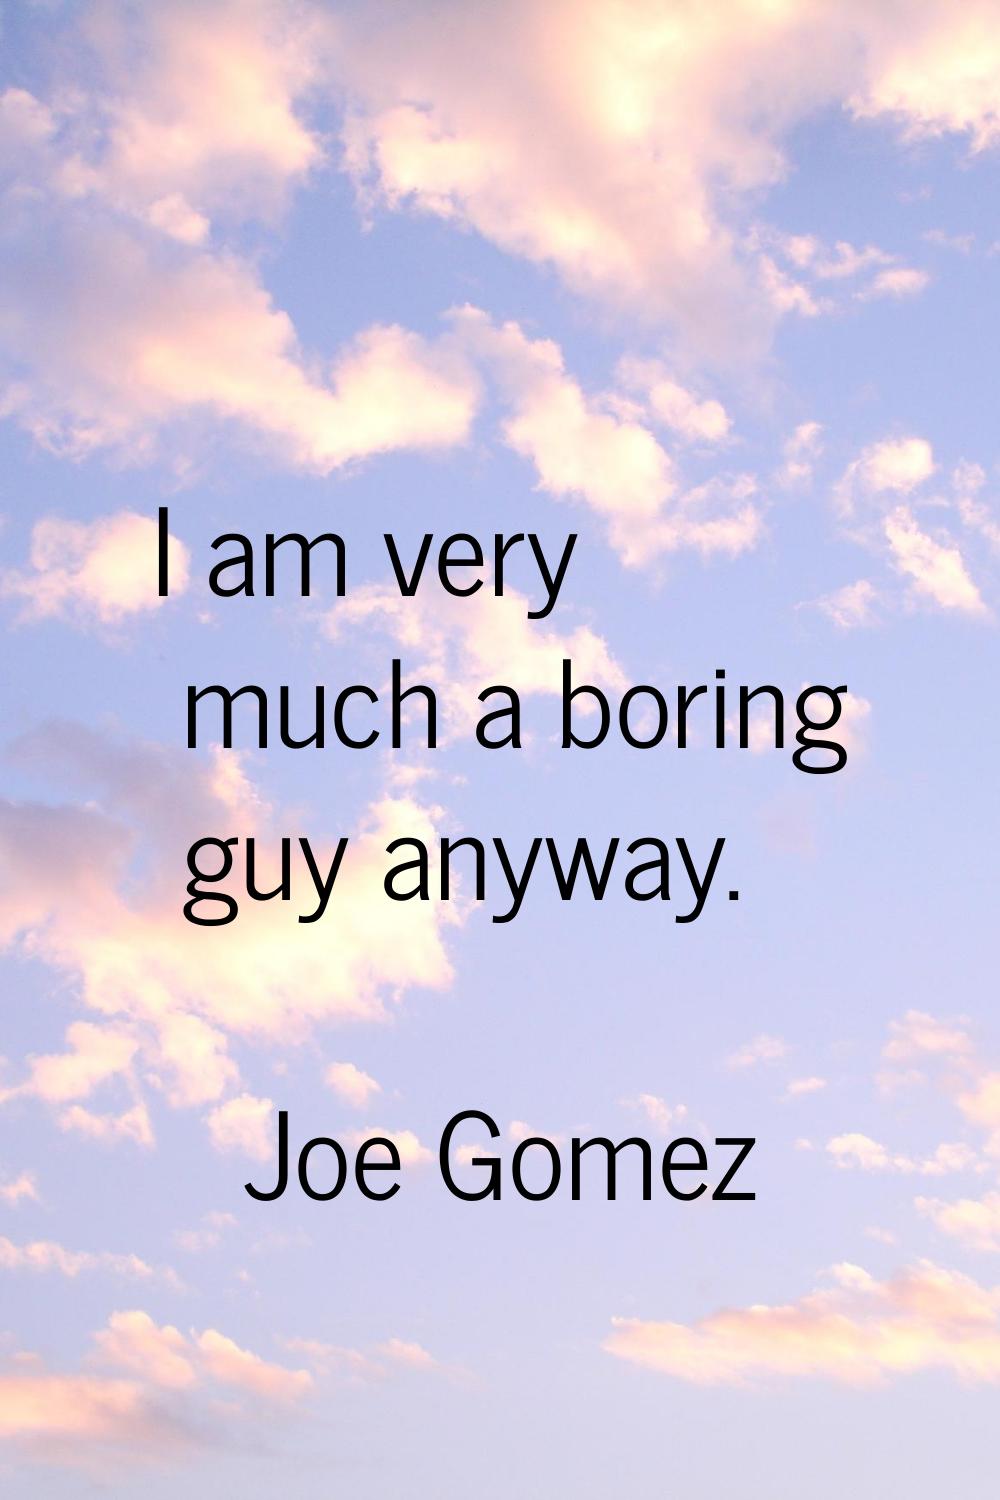 I am very much a boring guy anyway.